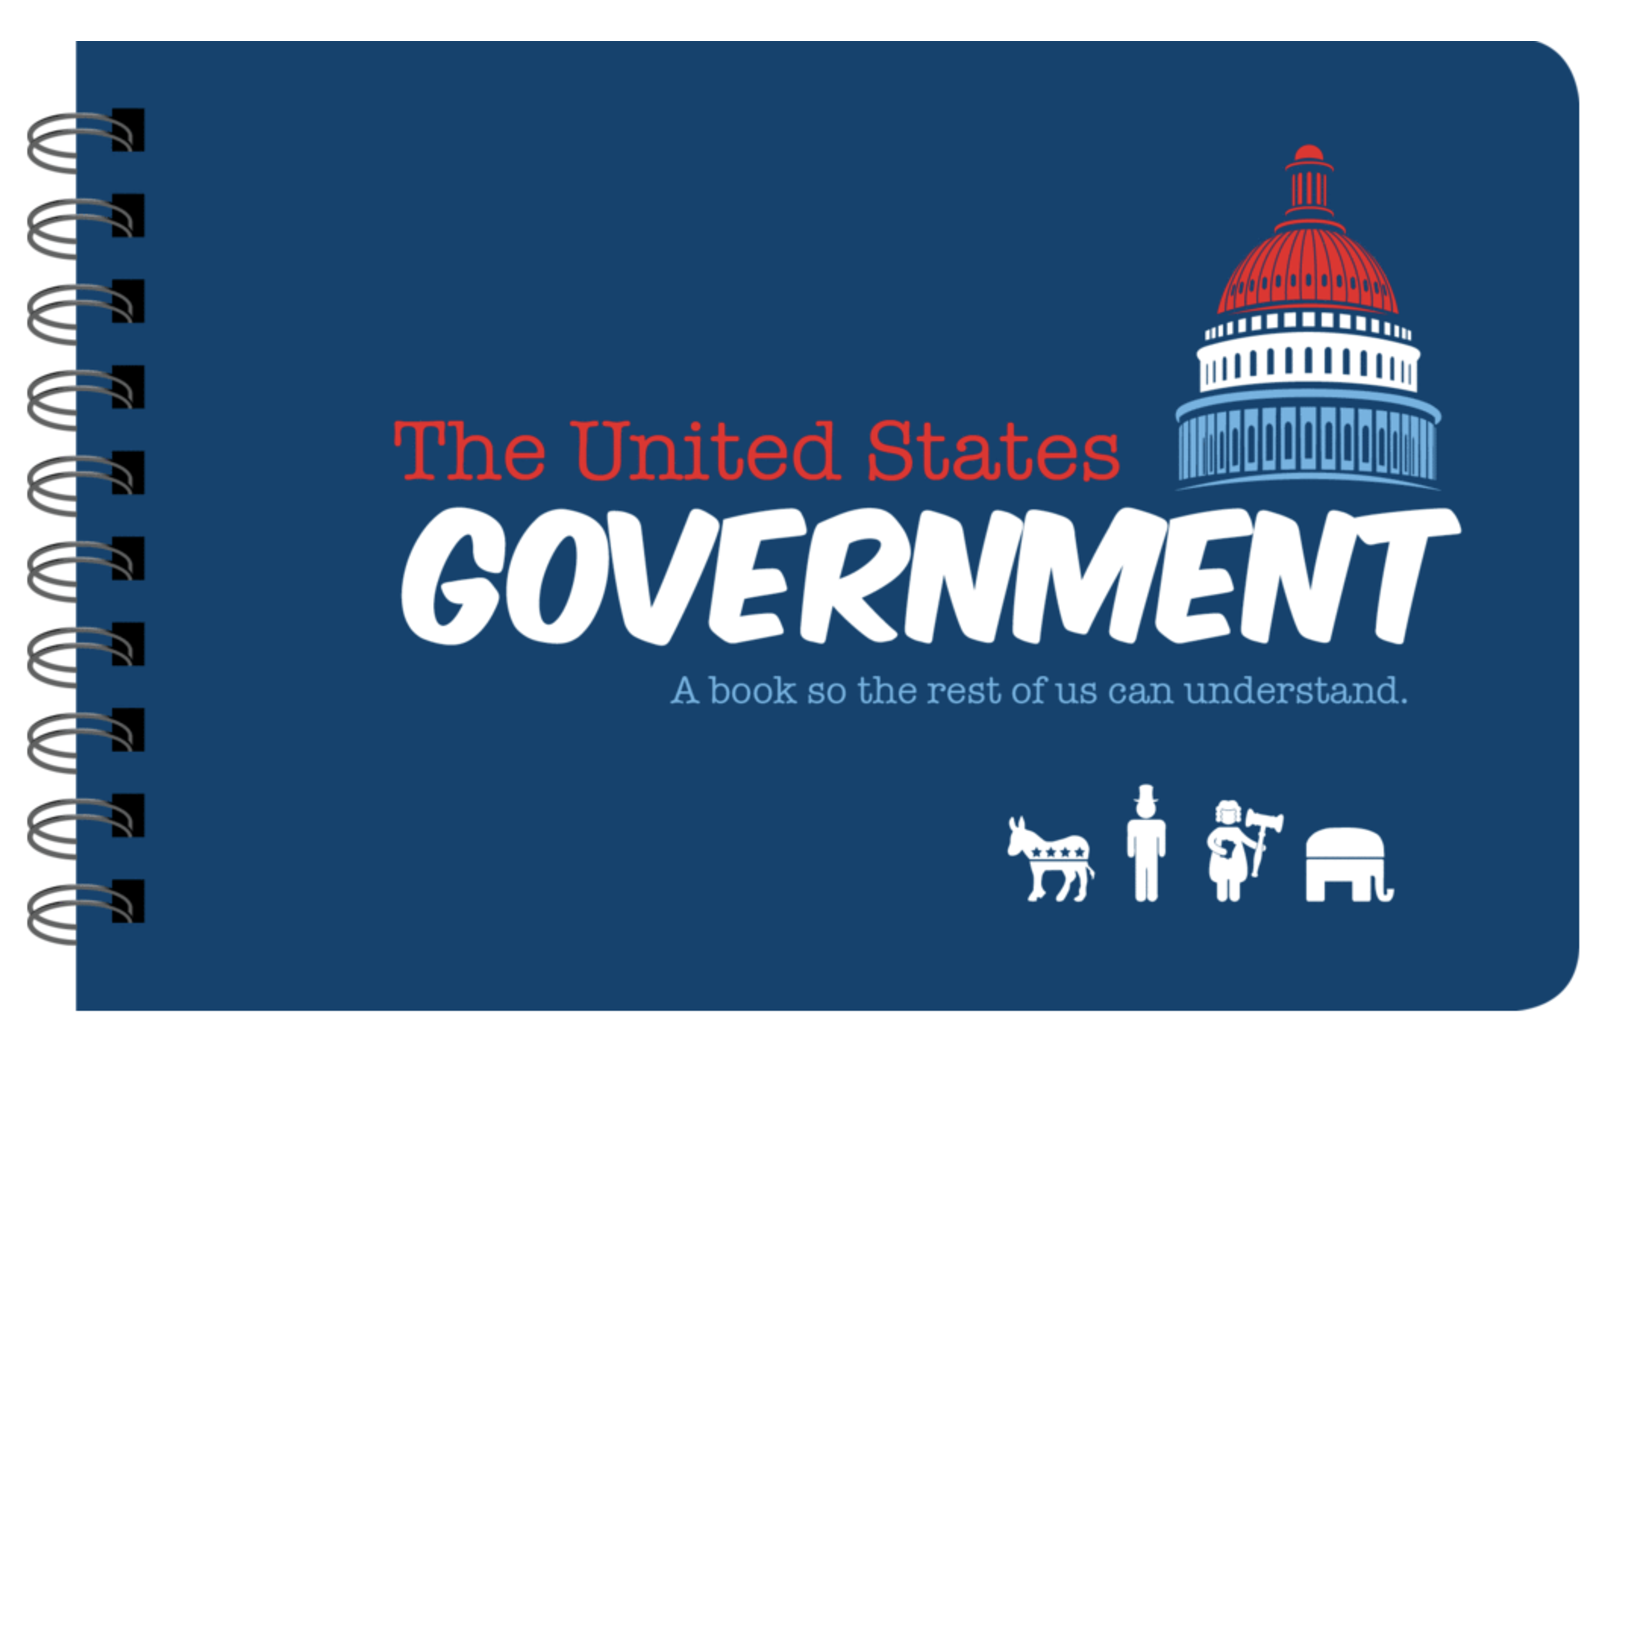 Book - The United States Government